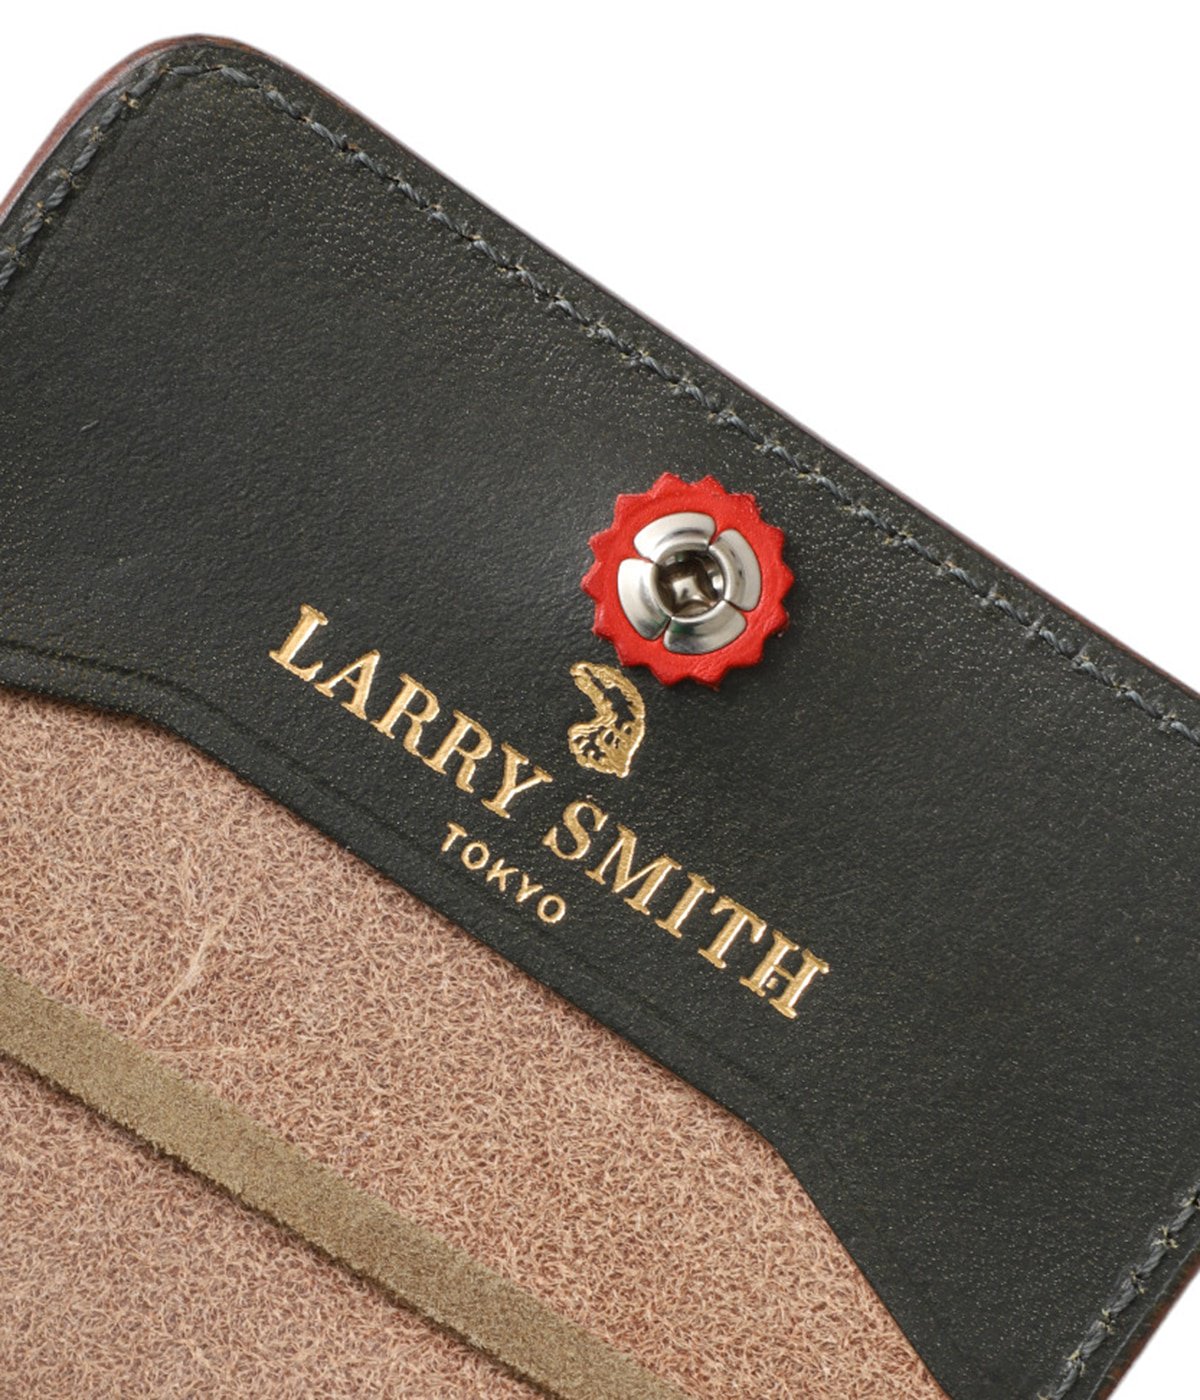 Larry Smith LIMITED CARD CASE